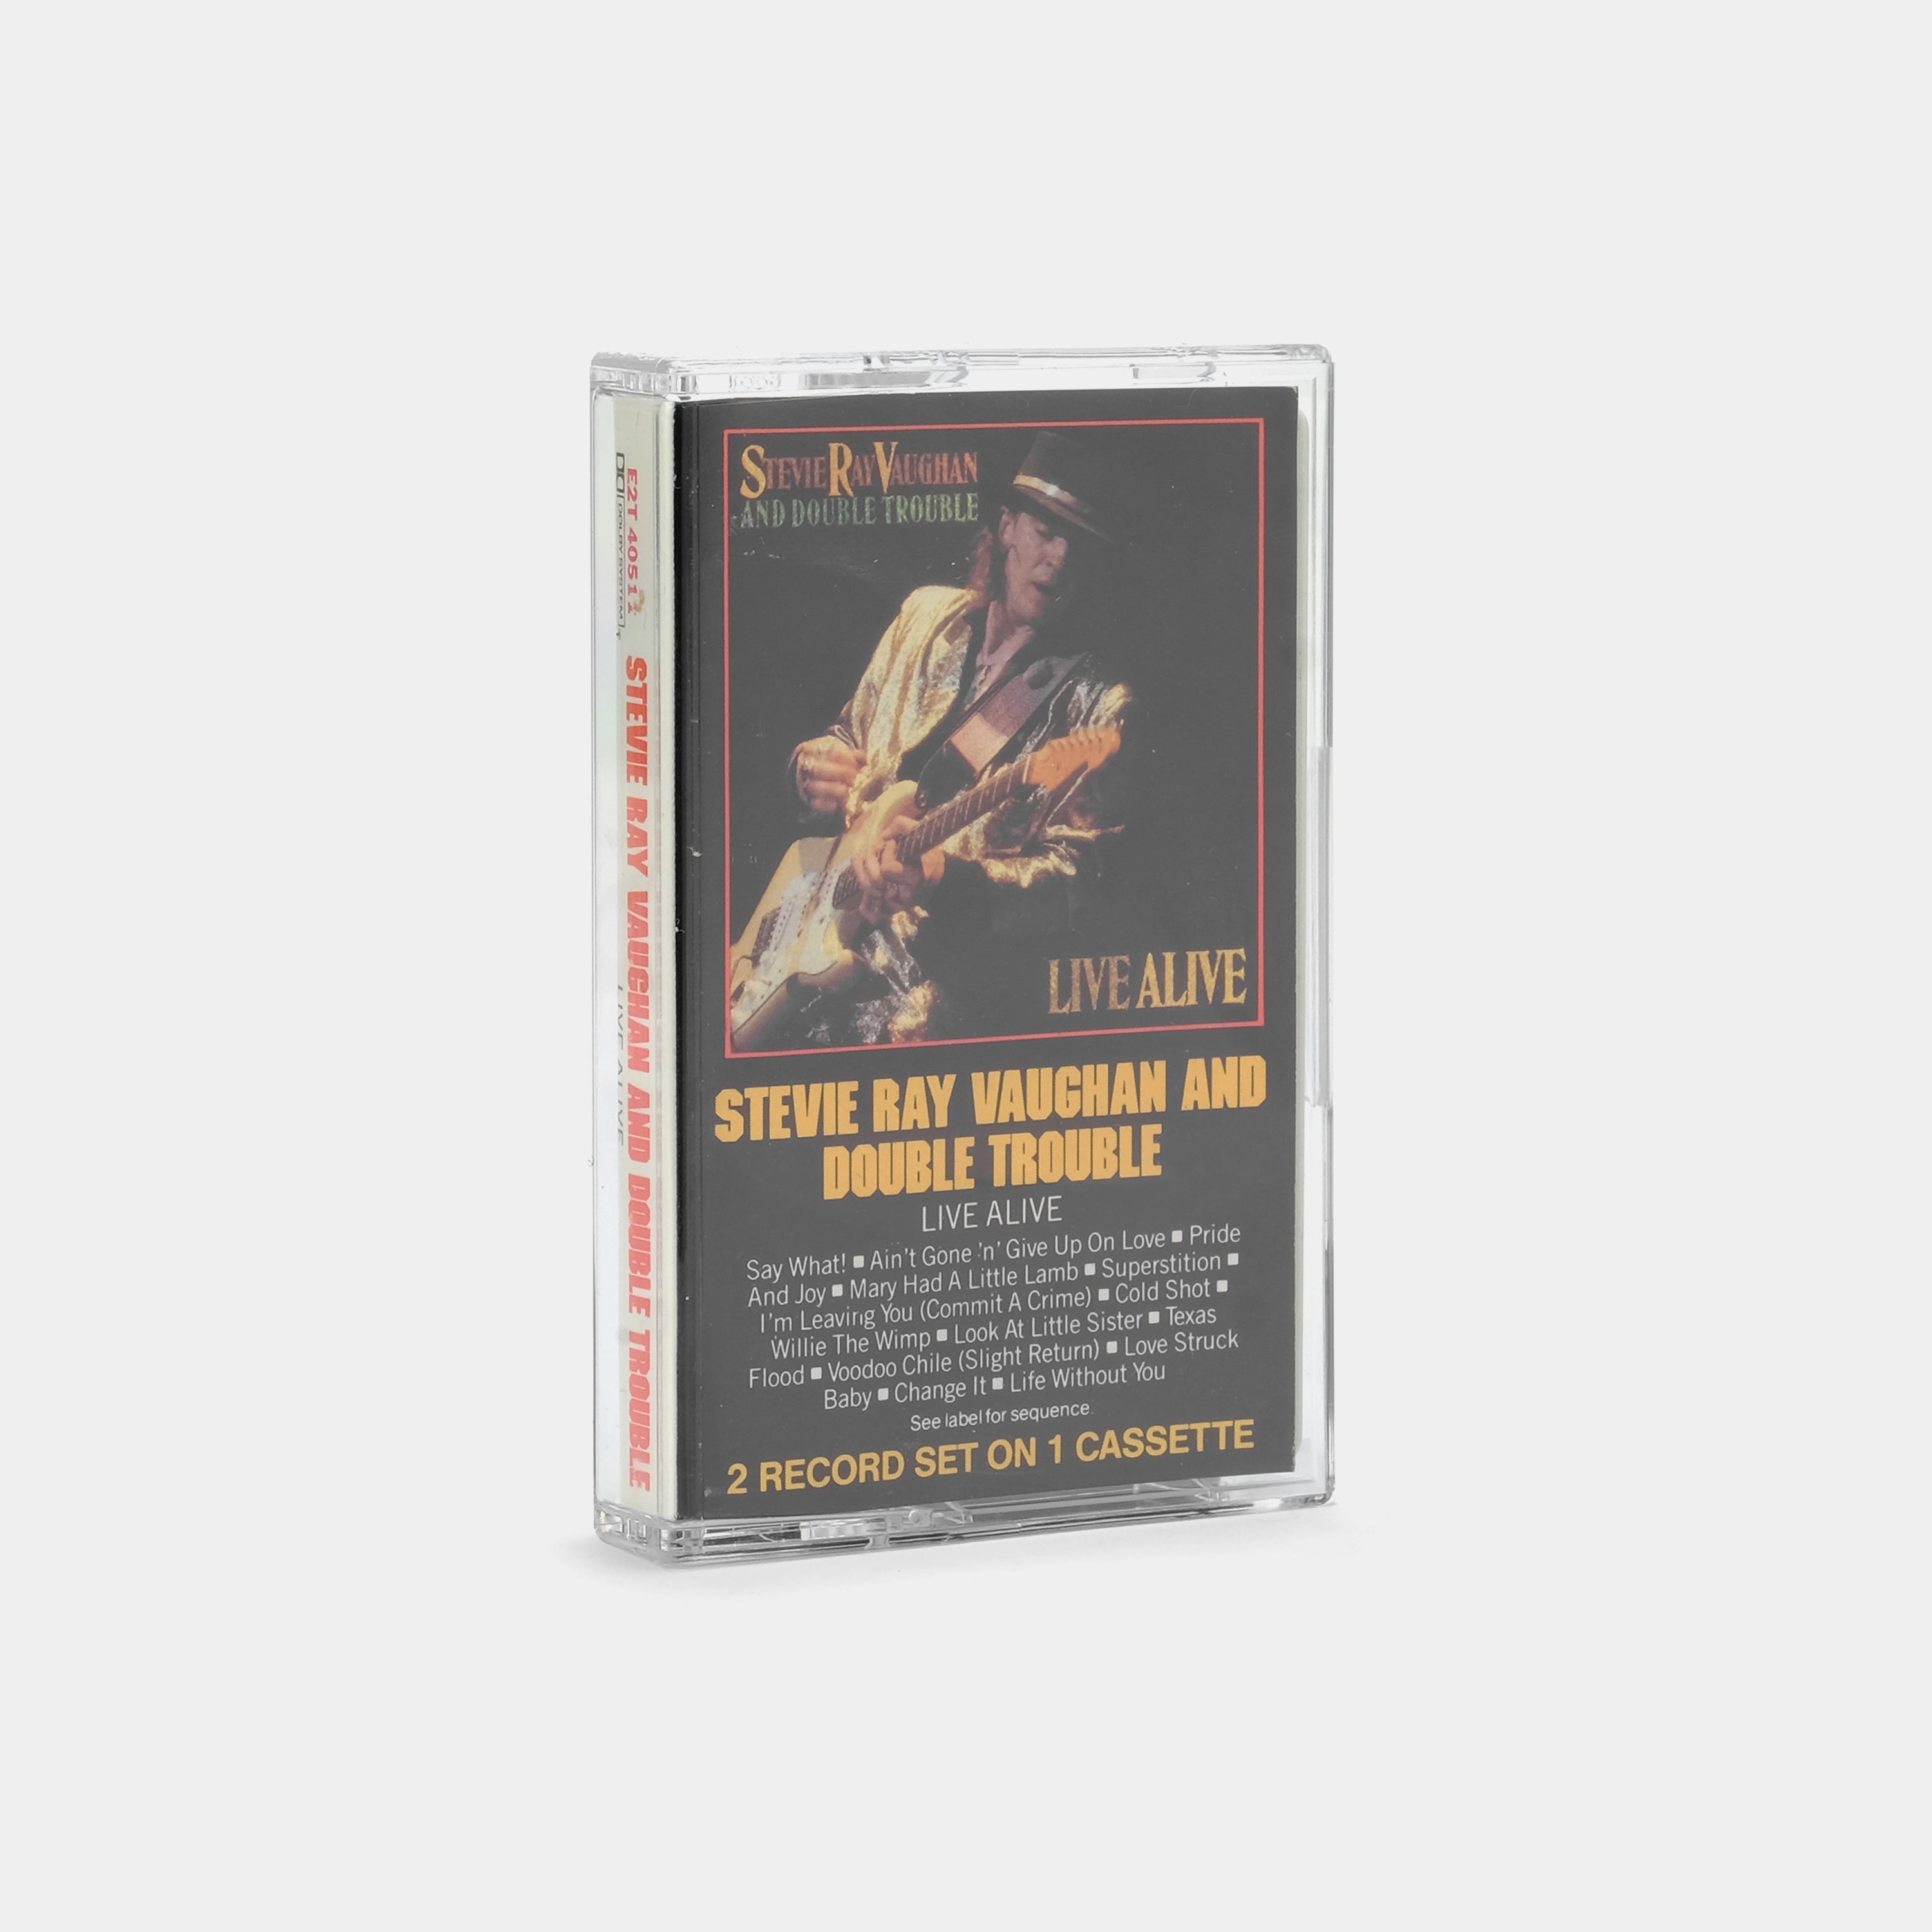 Stevie Ray Vaughan And Double Trouble - Live Alive Cassette Tape